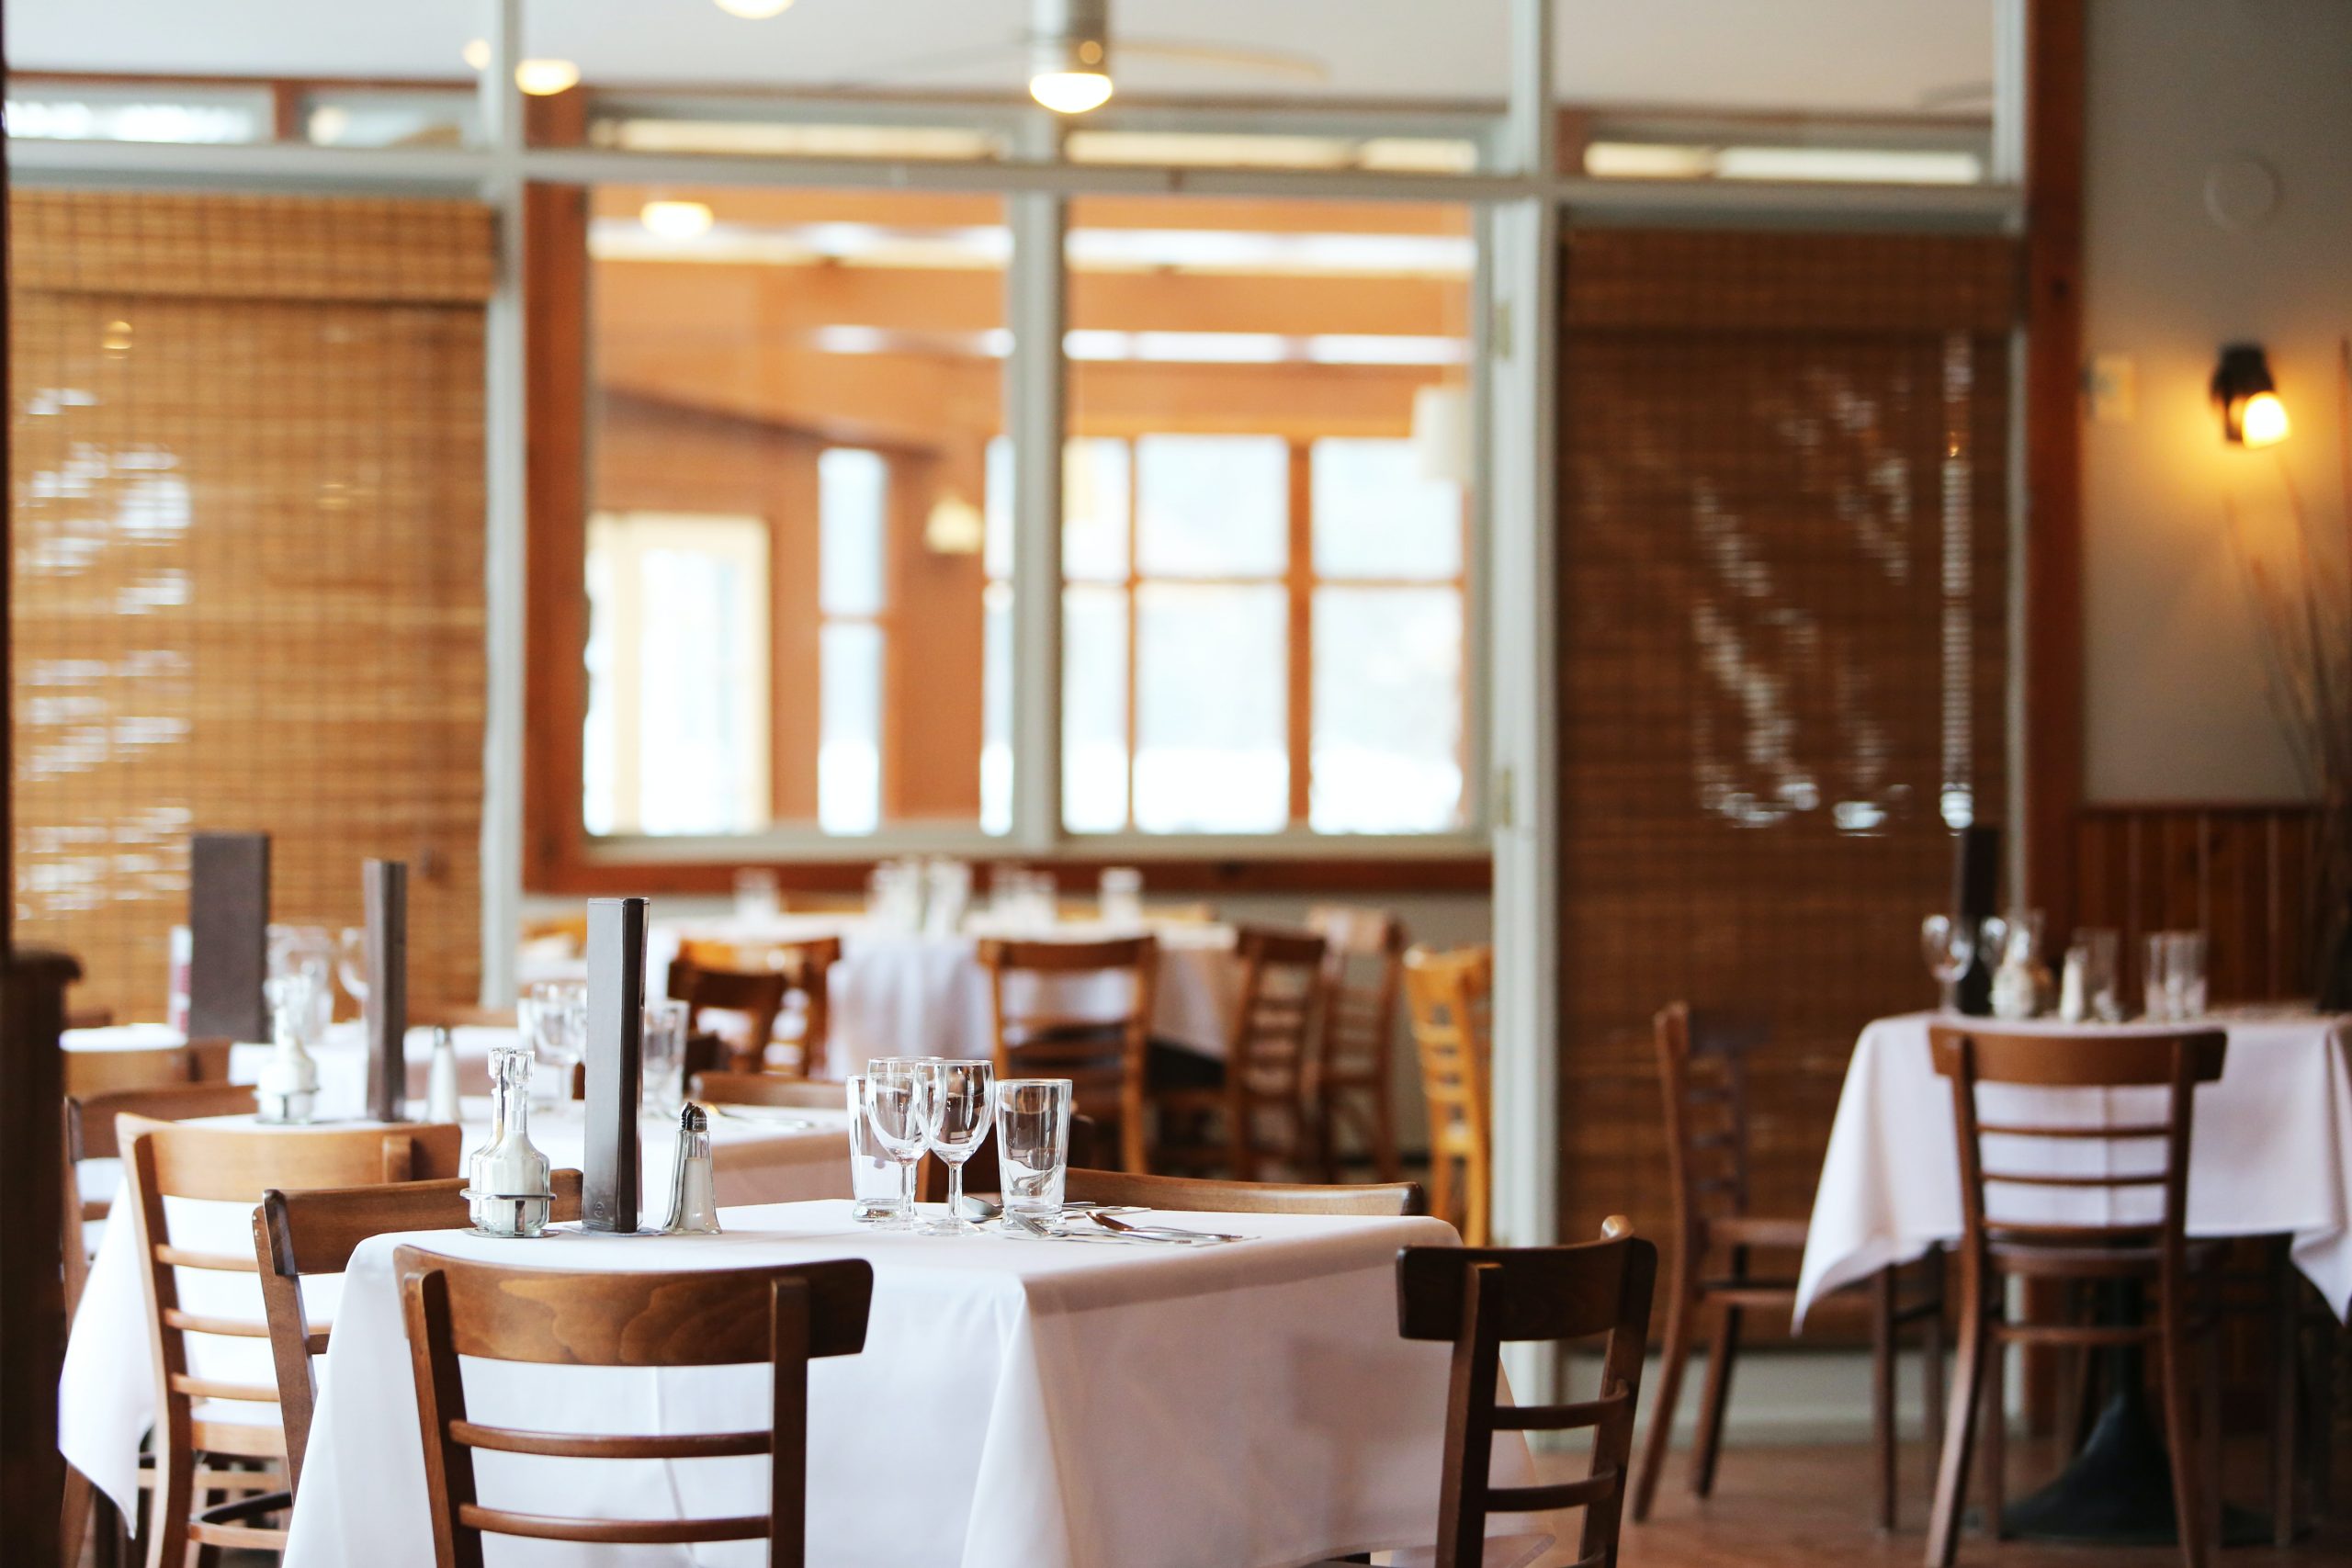 Restaurant Accounting Services in Reston